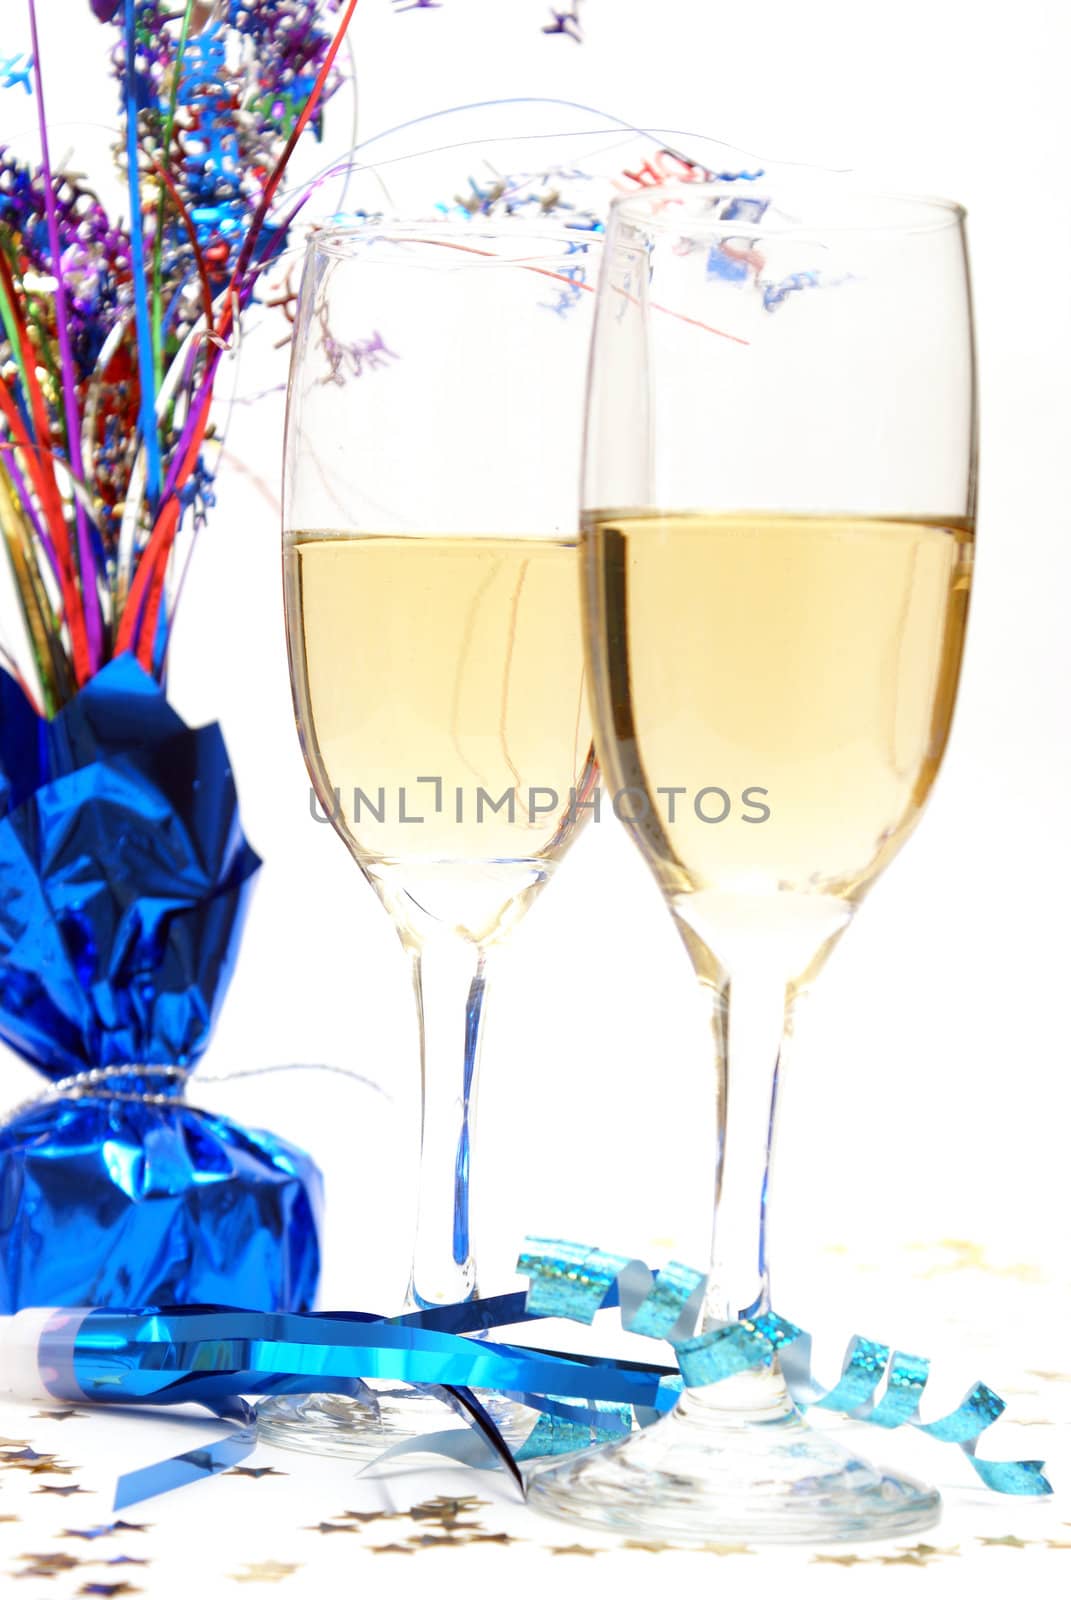 Two glasses of champagne on a white background.